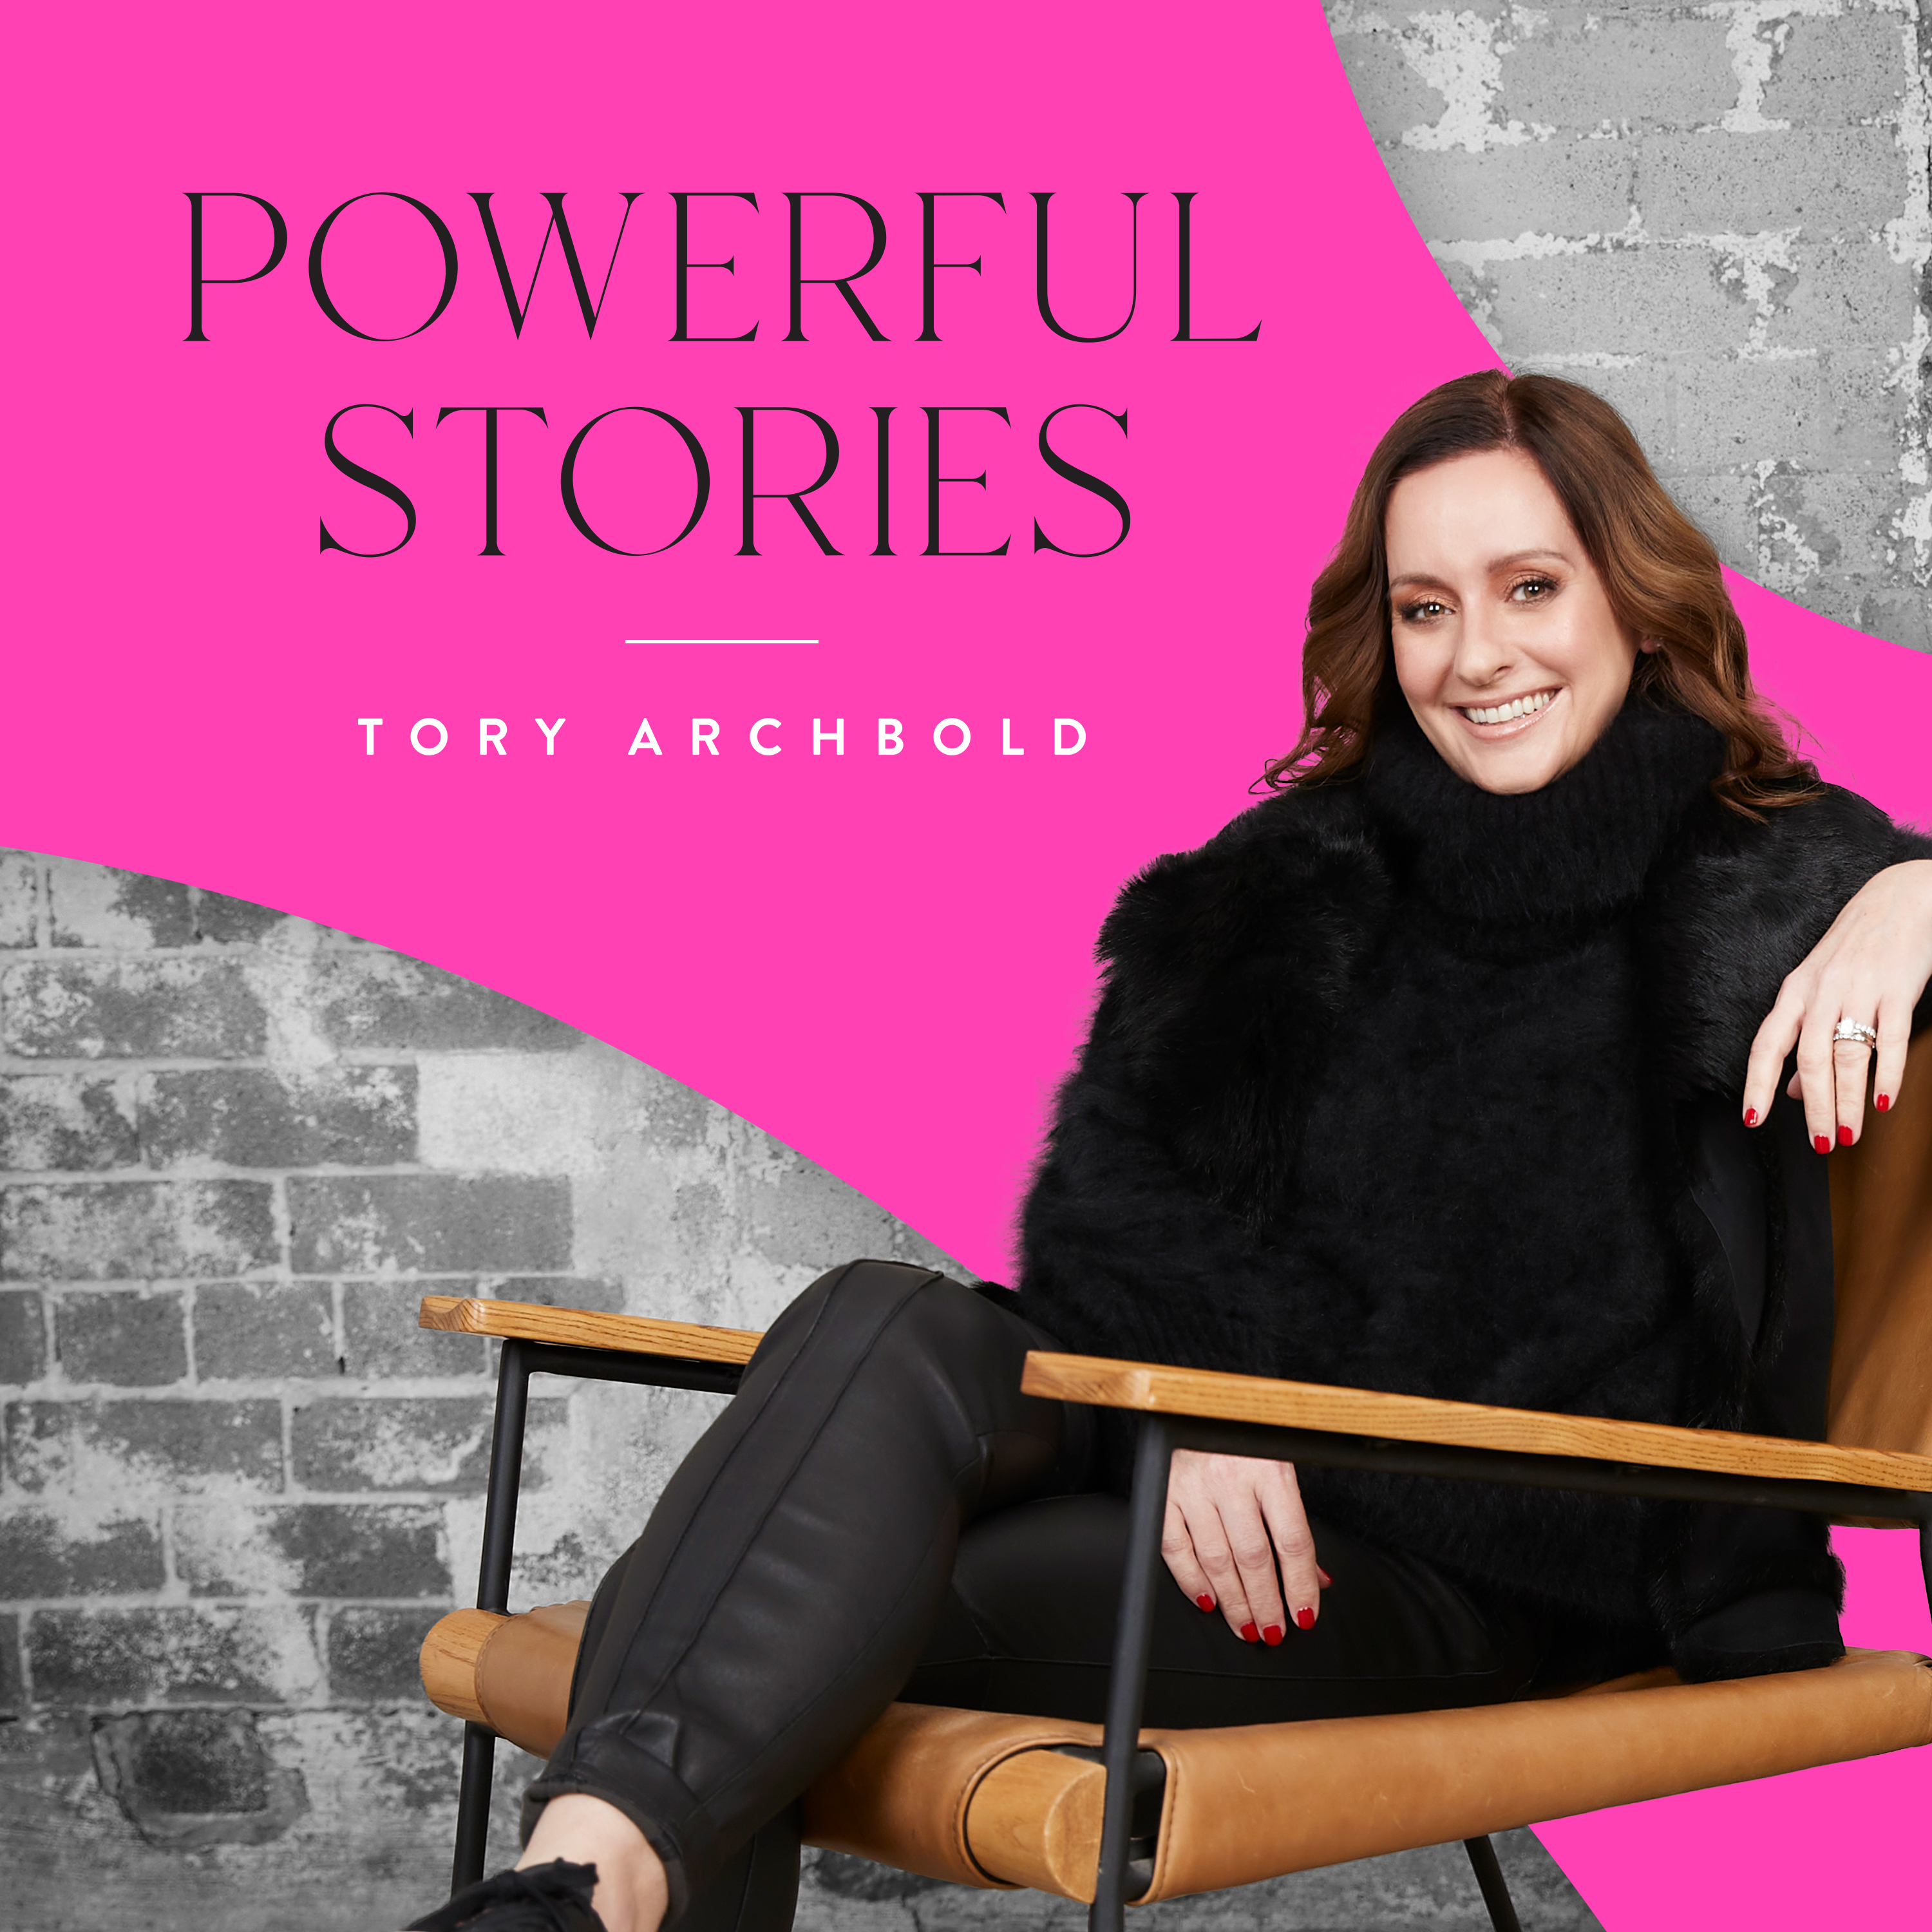 5 habits that will improve your well-being with Powerful Stories Host Tory Archbold